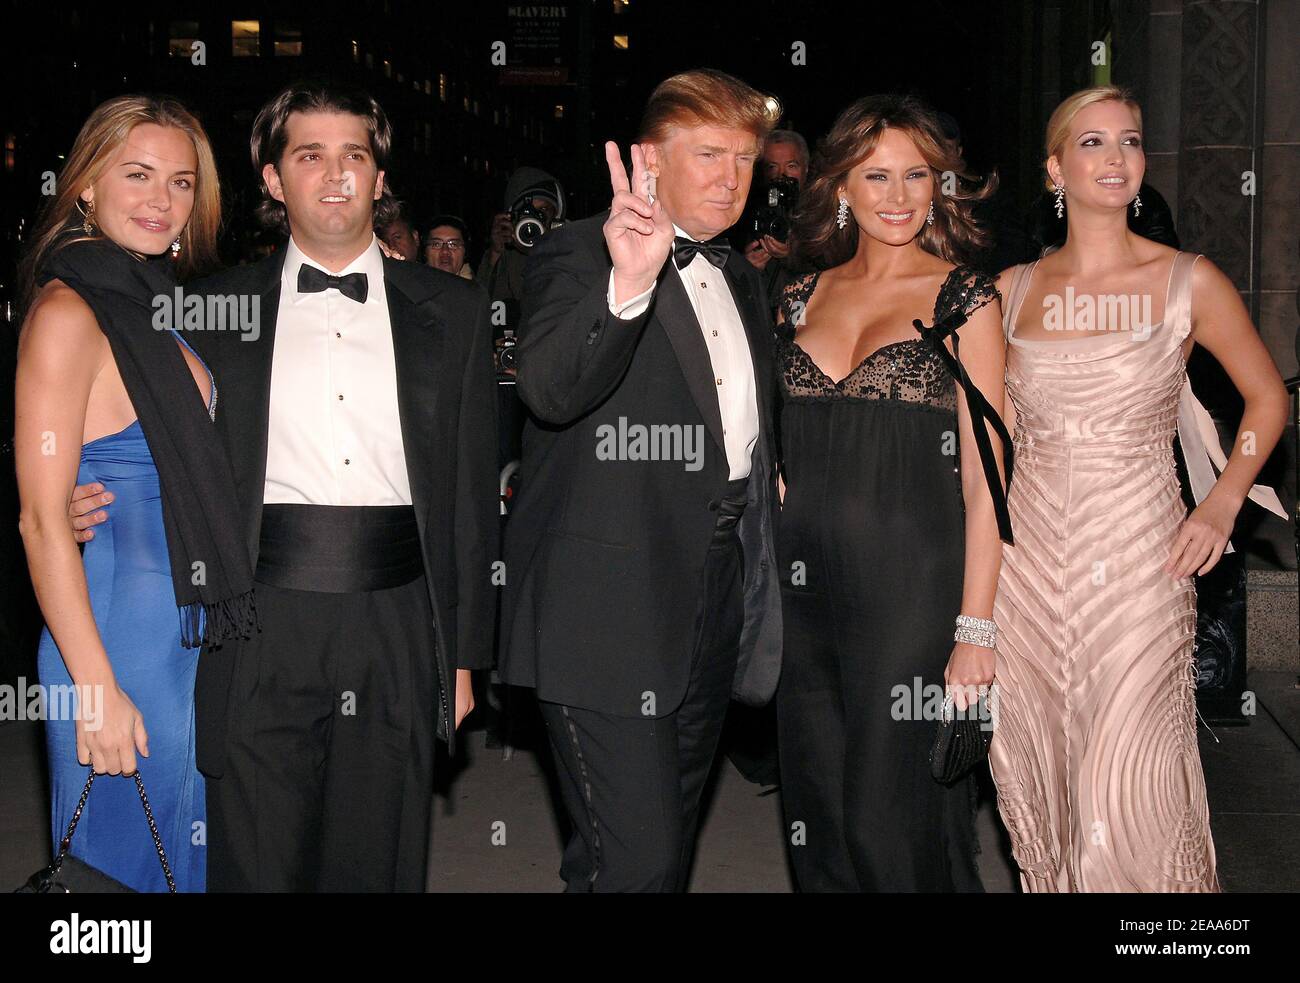 Donald Trump and his pregnant wife Melania Trump along with his son Donald  Trump Jr. (left) and his daughter Ivanka Trump arrive at the 22nd Annual  Night of Stars Honoring ""The Romantics"",